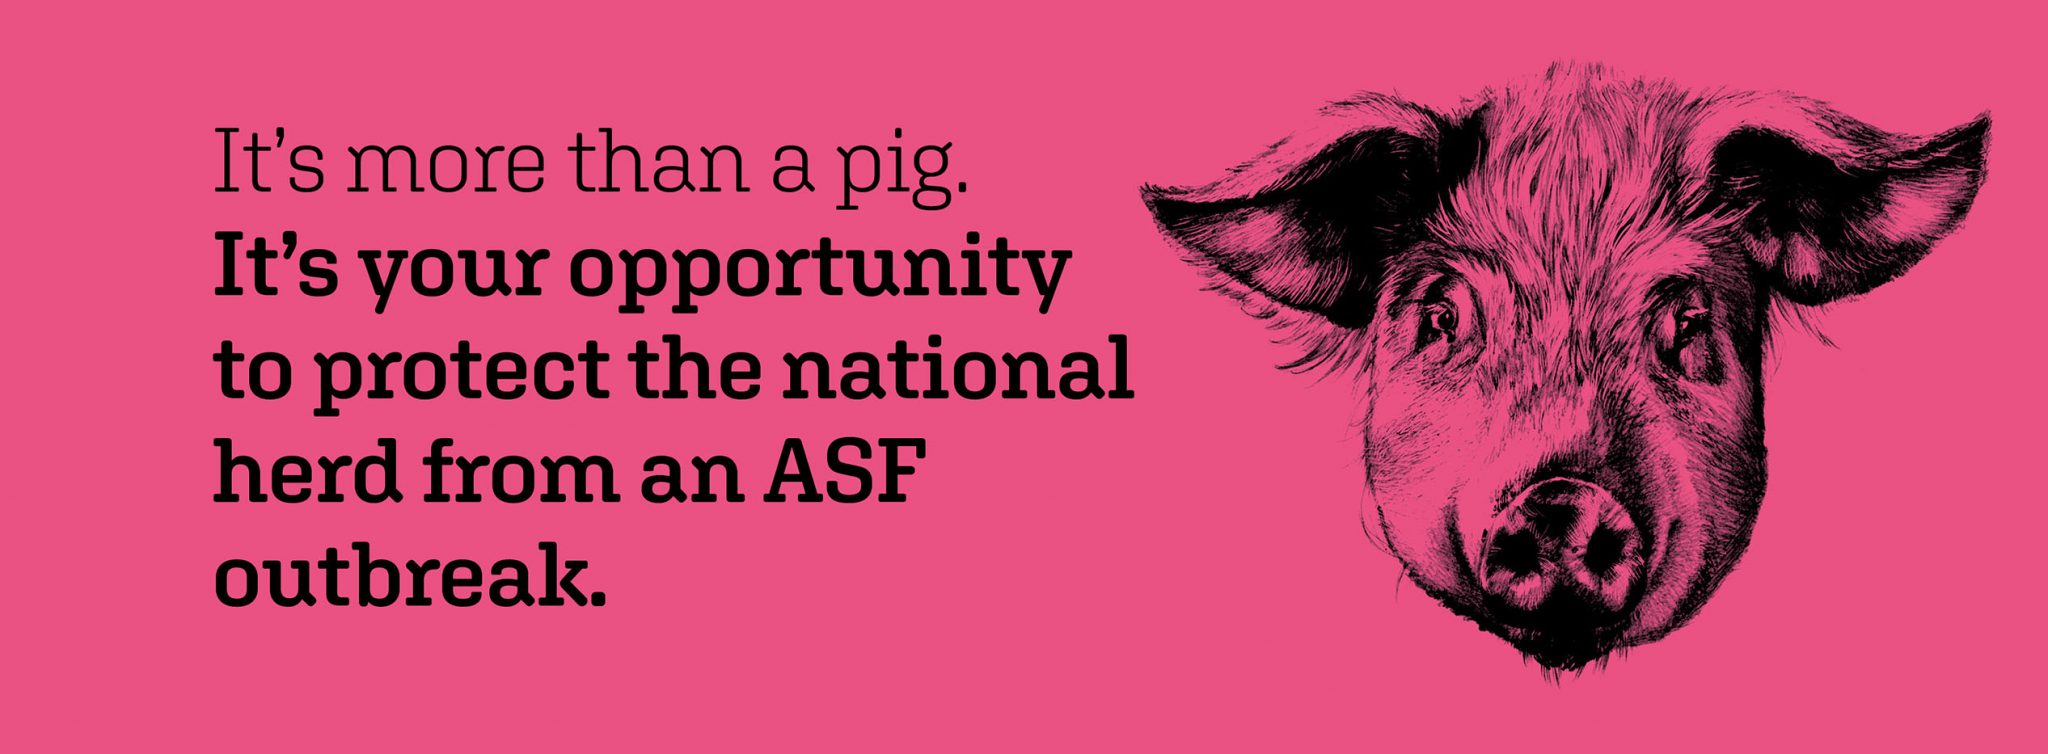 It's more than a pig. It's your opportunity to protect the national herd from an ASF outbreak.